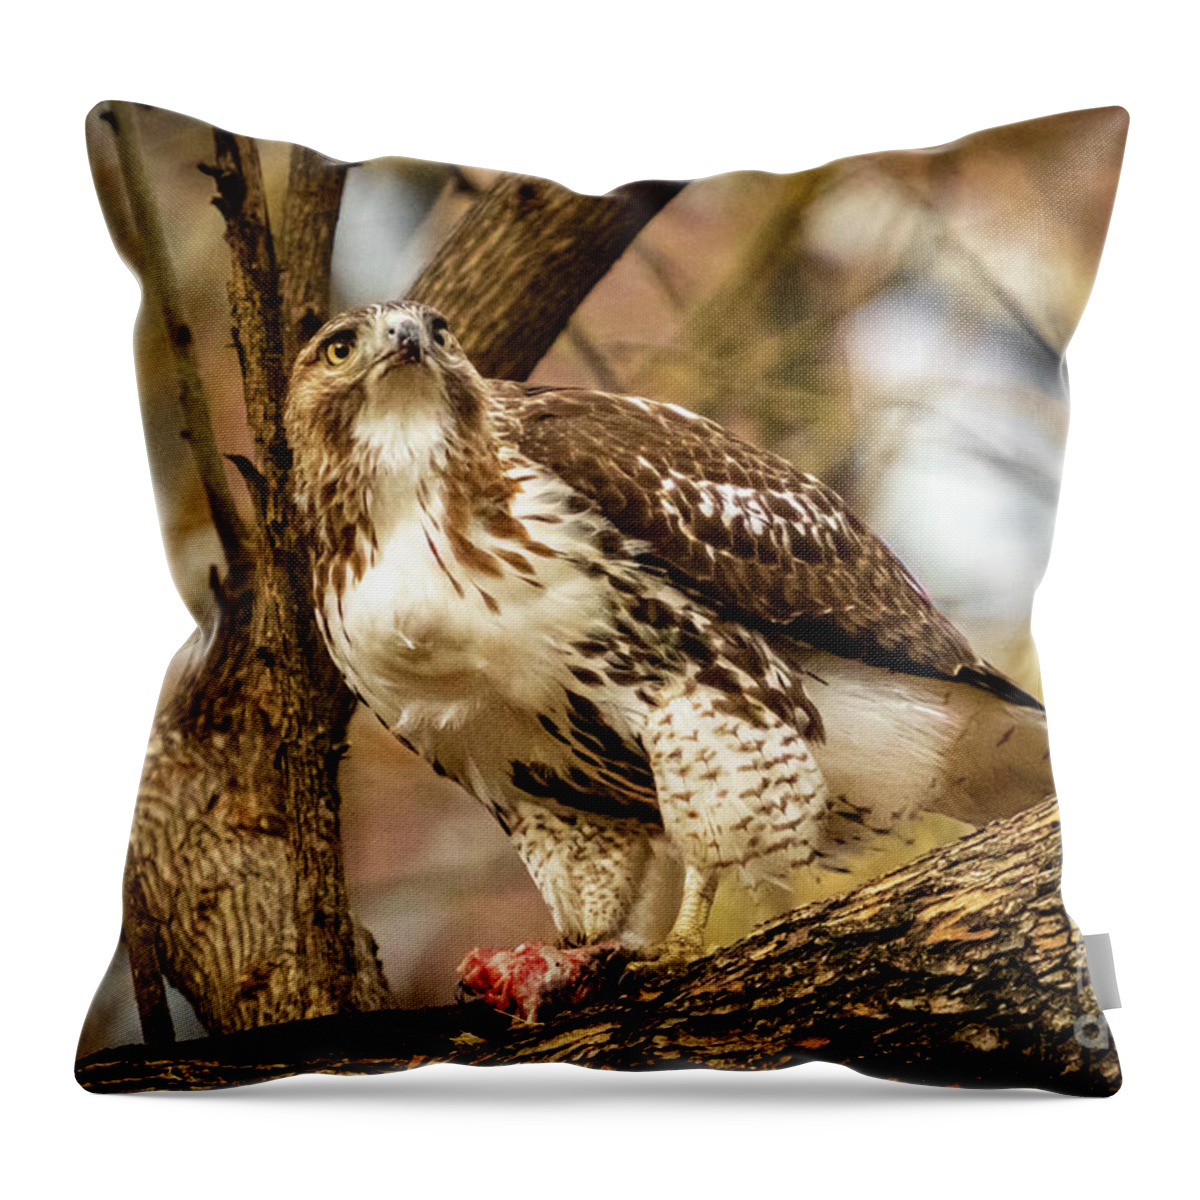 Hawk Throw Pillow featuring the photograph With a Meal by Alyssa Tumale